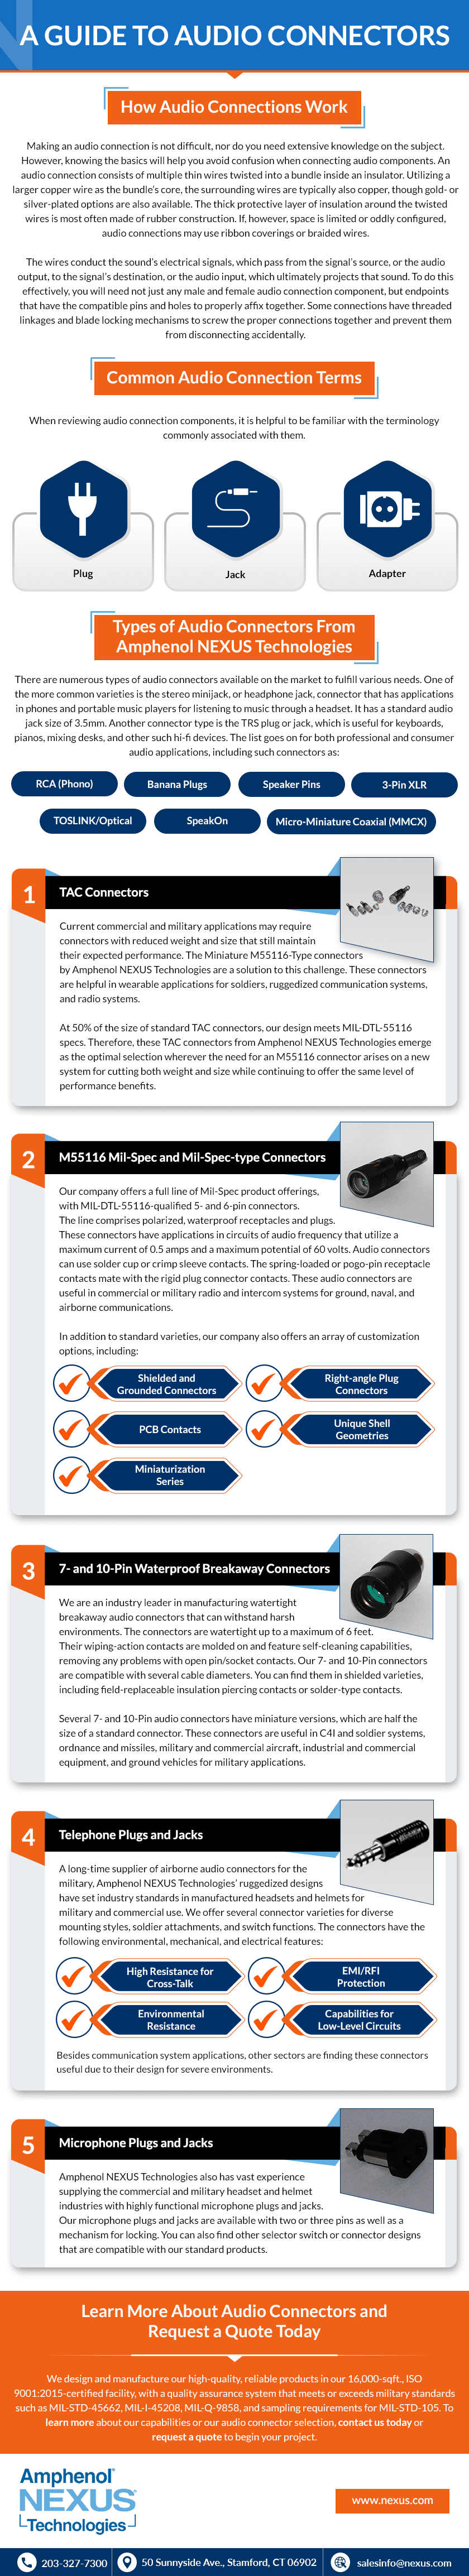 A Guide to Audio Connectors